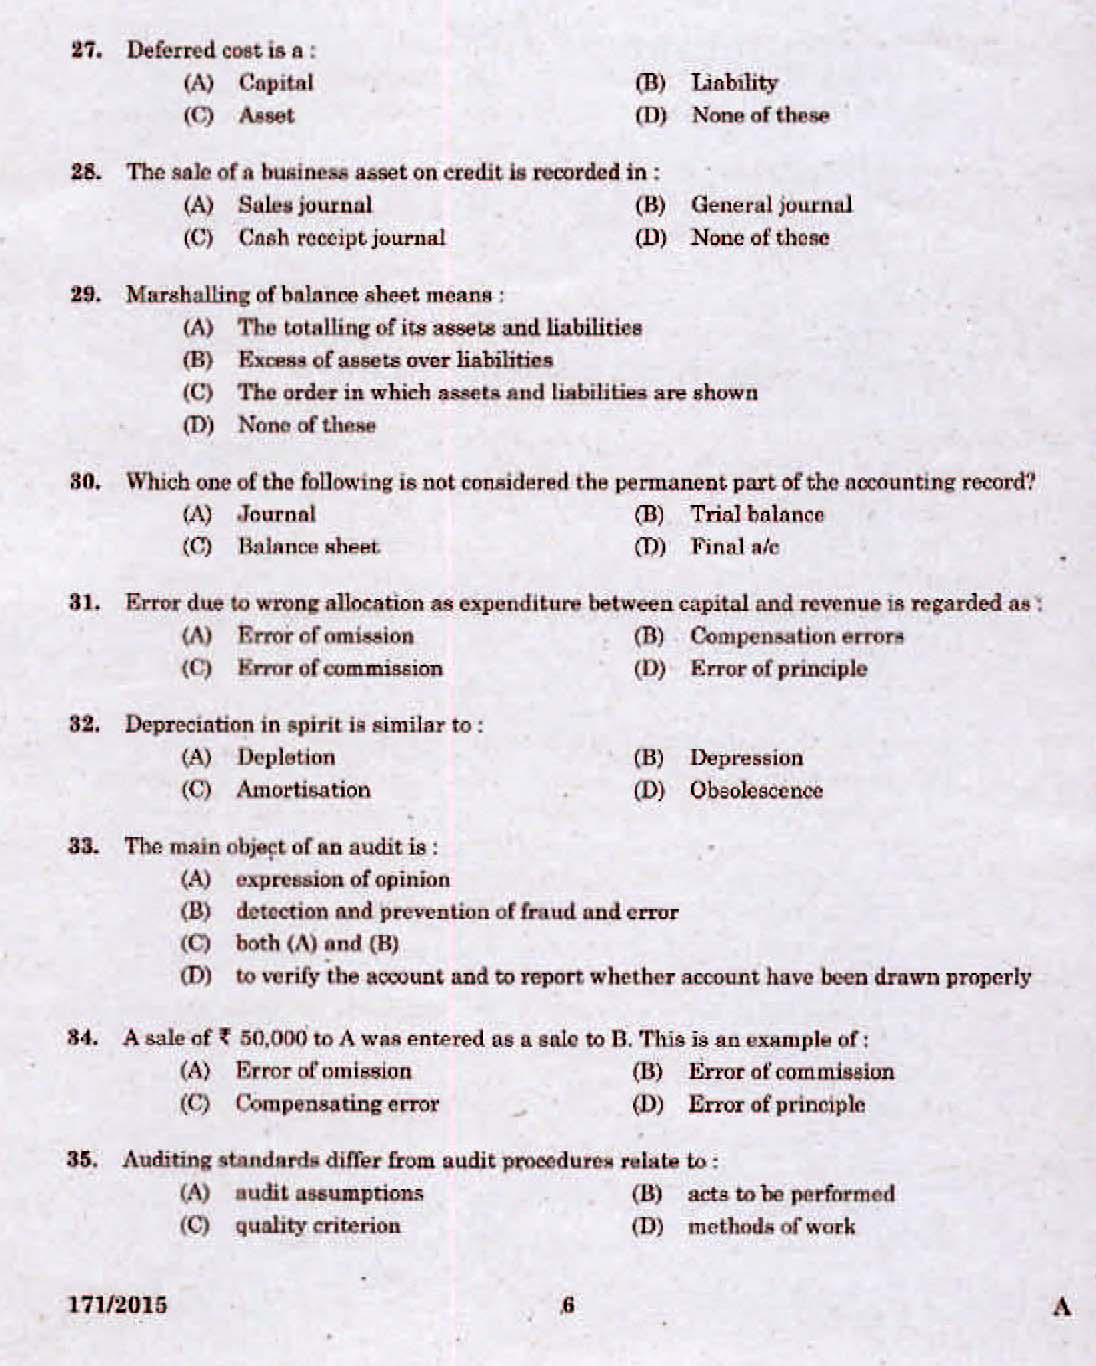 Kerala PSC Lower Division Accountant OMR Exam 2015 Question Paper Code 1712015 4